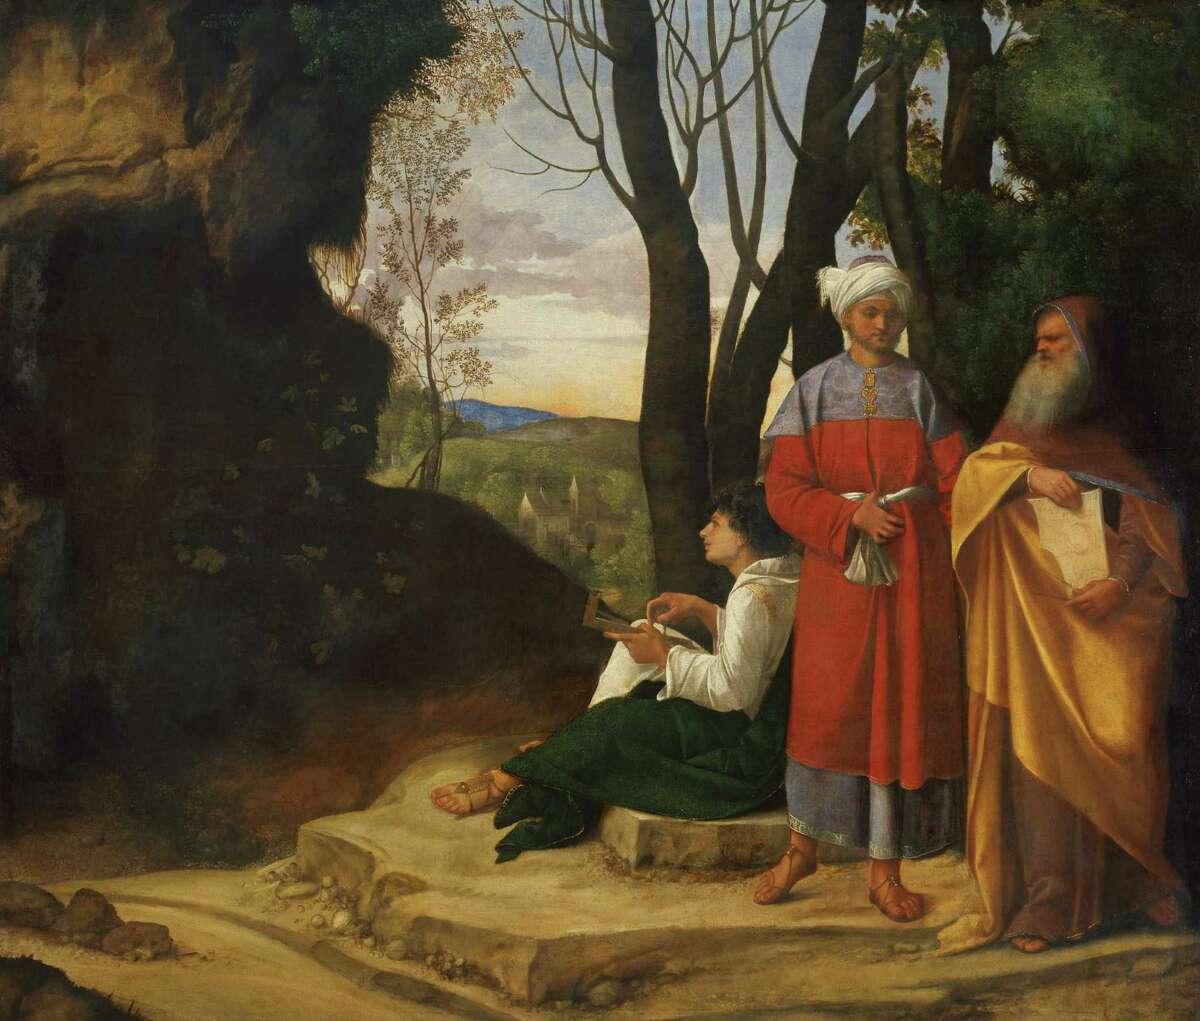 Giorgione (Giorgio da Castelfranco)'s "Three Philosophers" (1508/09) is among the masterpieces coming to the Museum of Fine Arts, Houston in June 2015 from the Kunsthistorisches Museum, Vienna. GG_111_Neu.tif